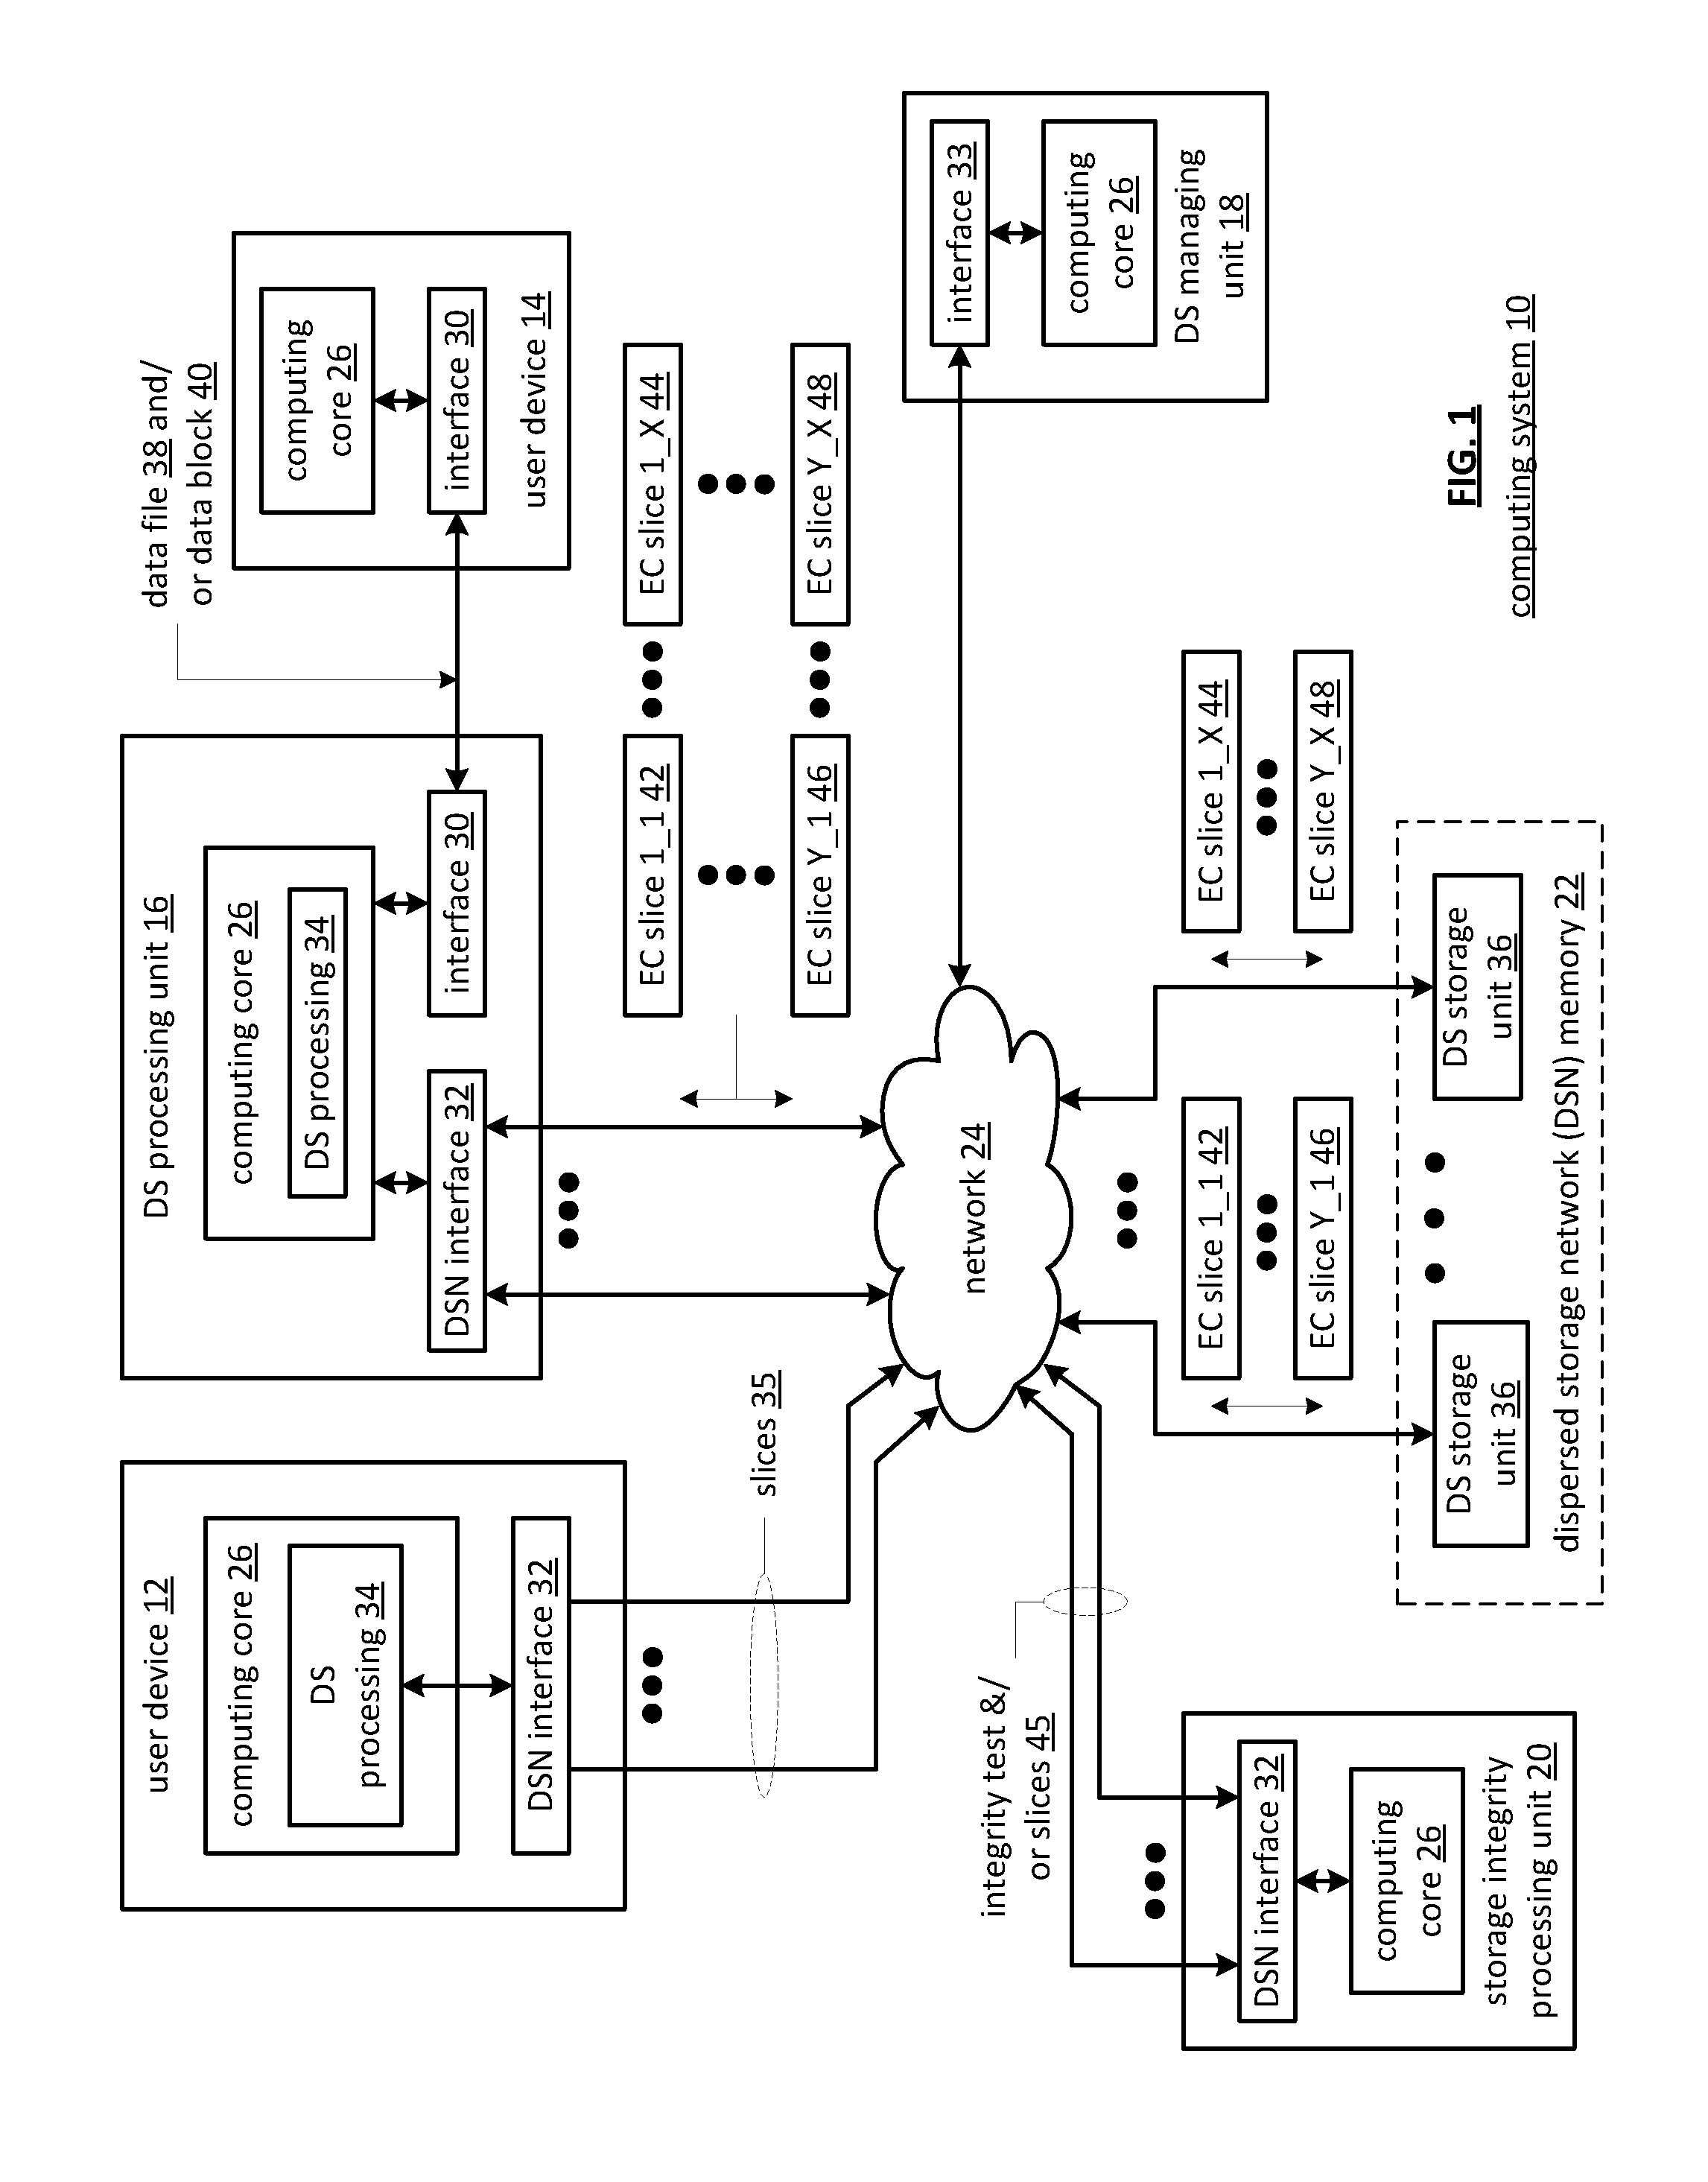 Method and apparatus for slice partial rebuilding in a dispersed storage network